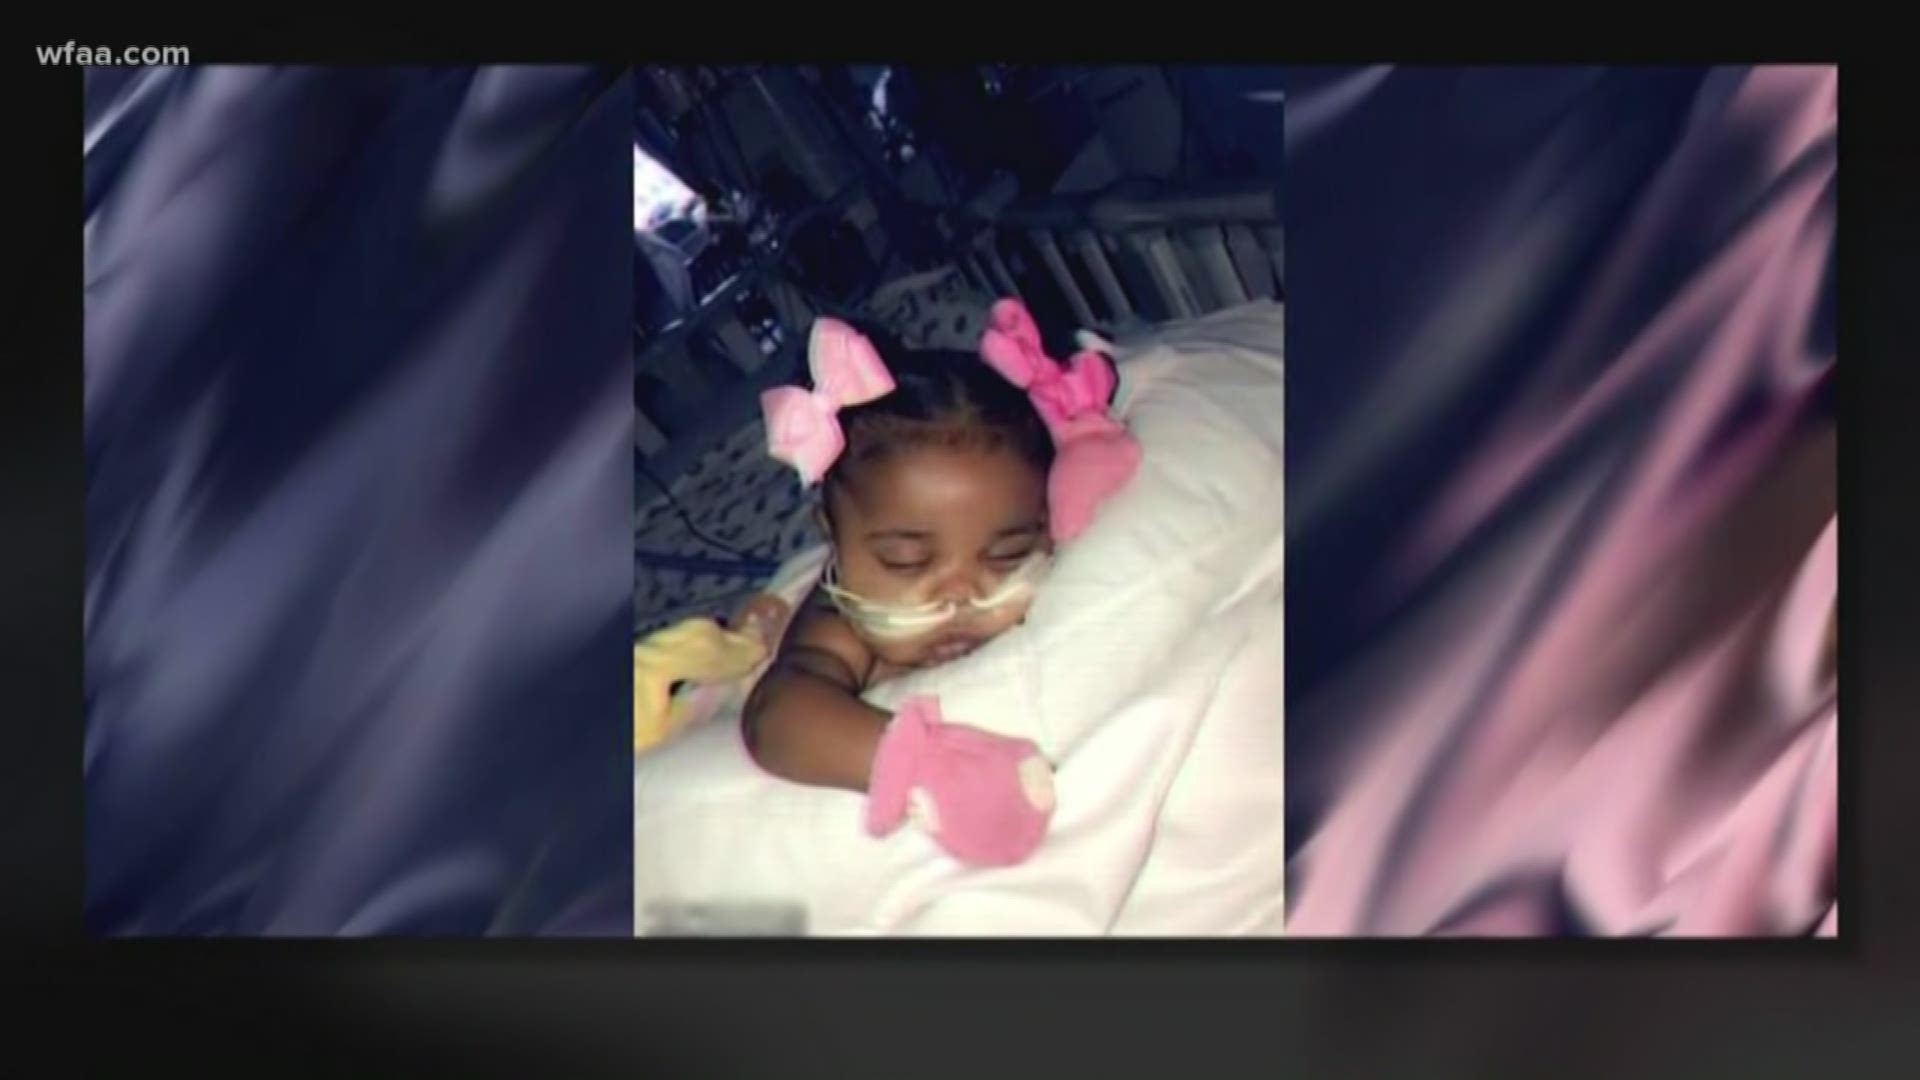 Chief Justice Sandee Marion has denied a temporary injunction to keep 11-month-old Tinslee Lewis alive in Fort Worth.